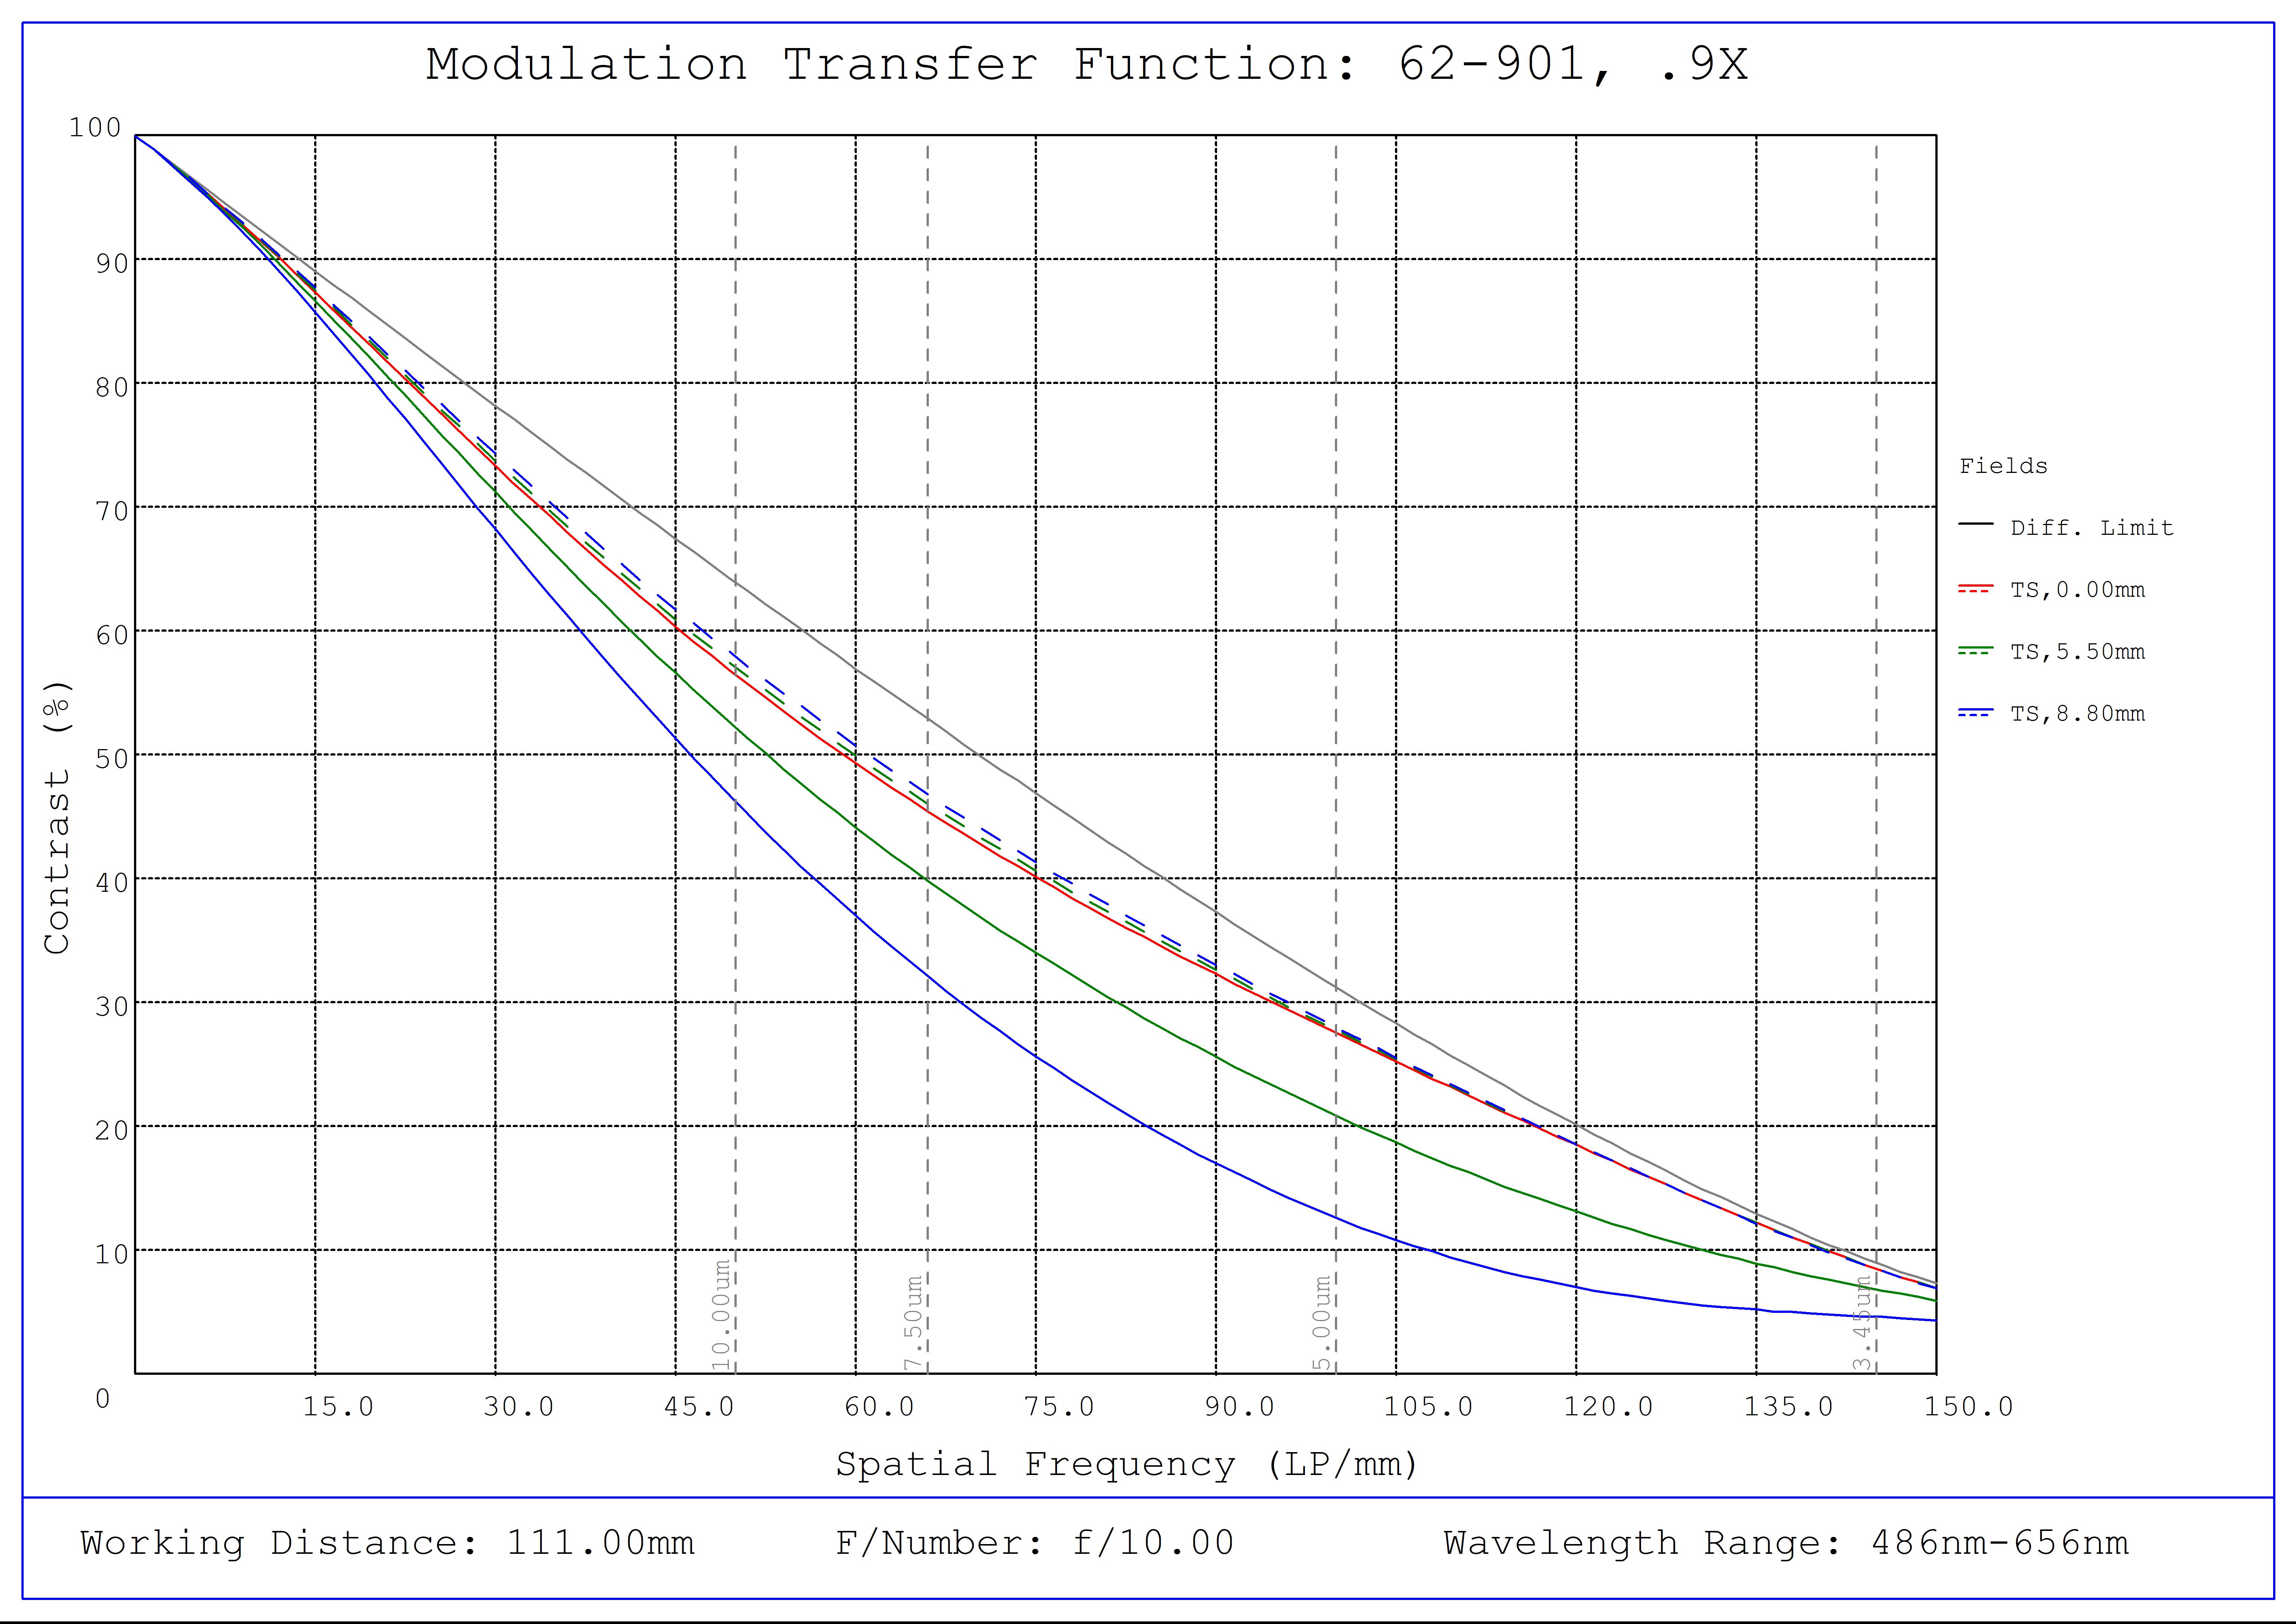 #62-901, 0.9X CobaltTL Telecentric Lens, Modulated Transfer Function (MTF) Plot, 111mm Working Distance, f10